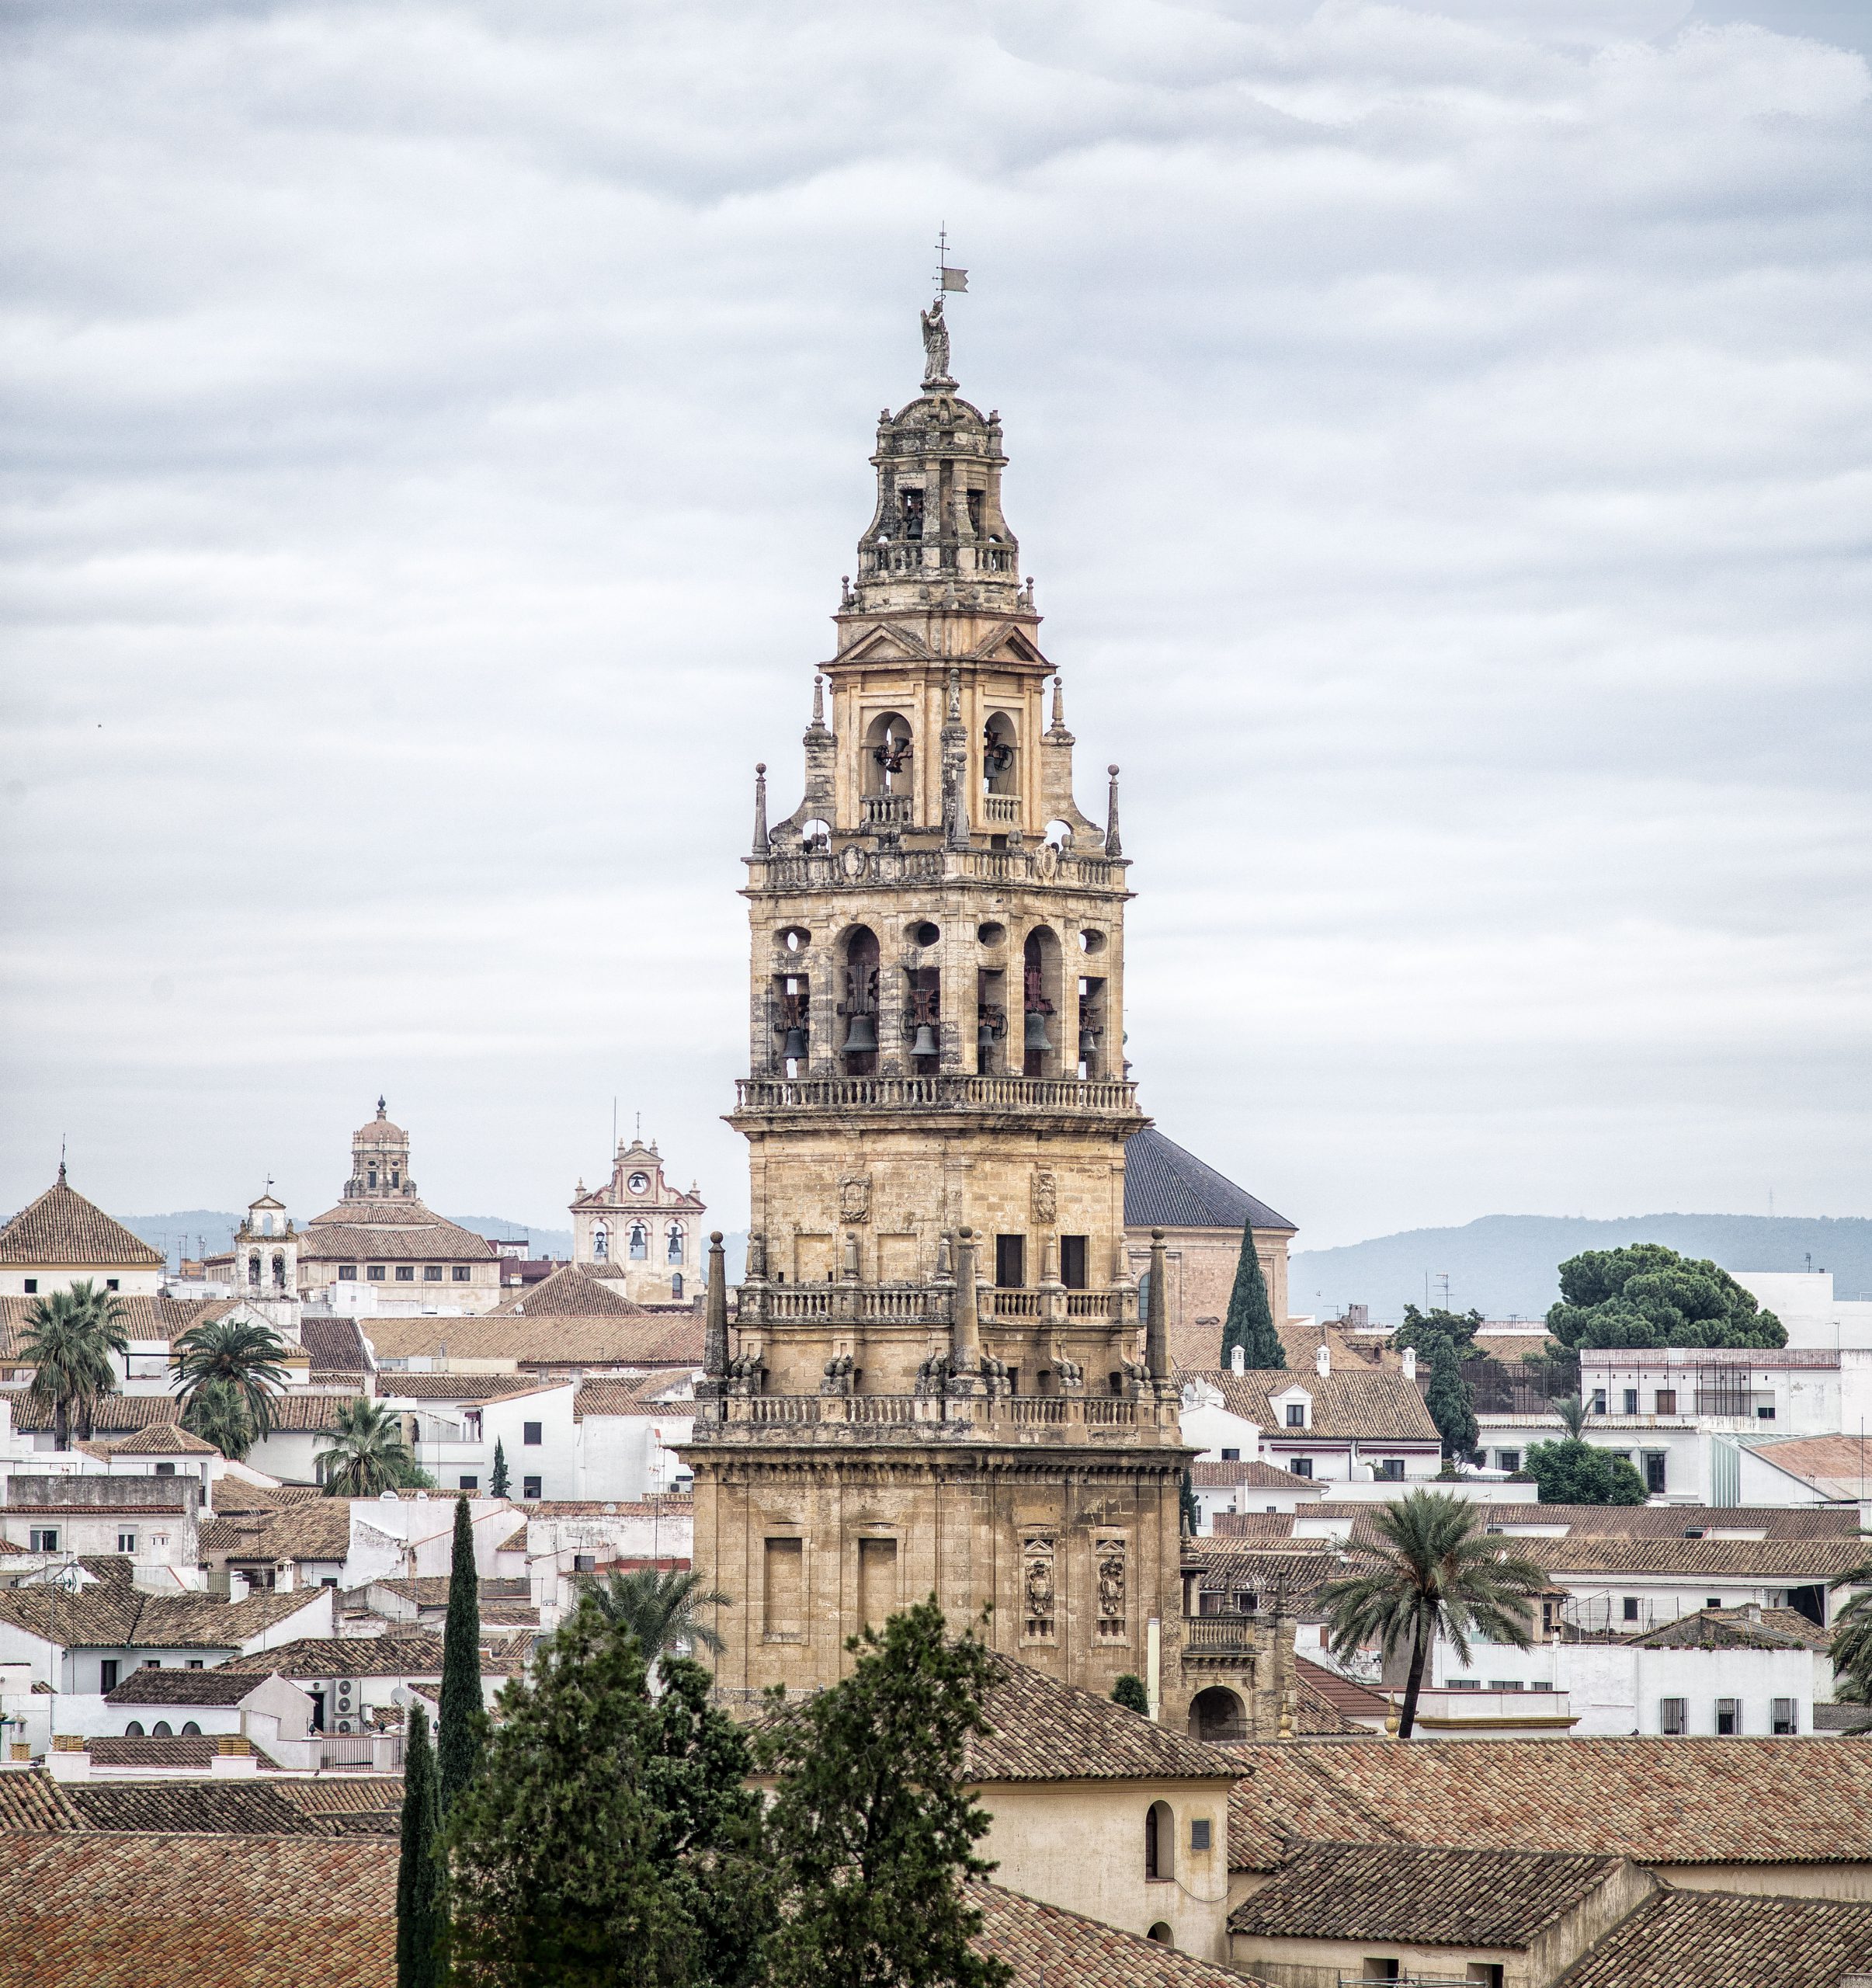 Cordoba: The Cathedral